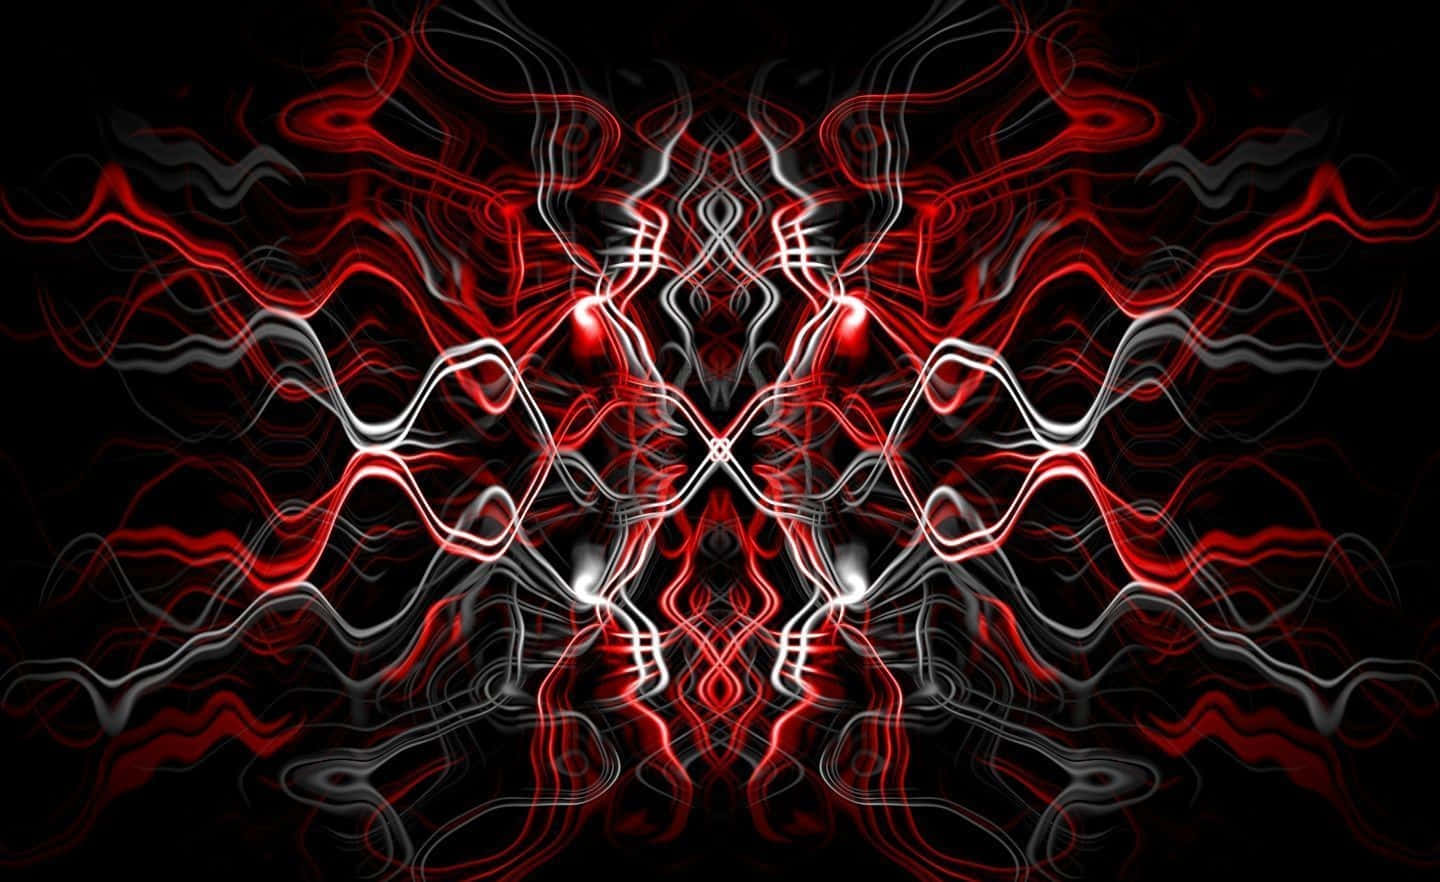 A Rich, Elegant Red Abstract Background